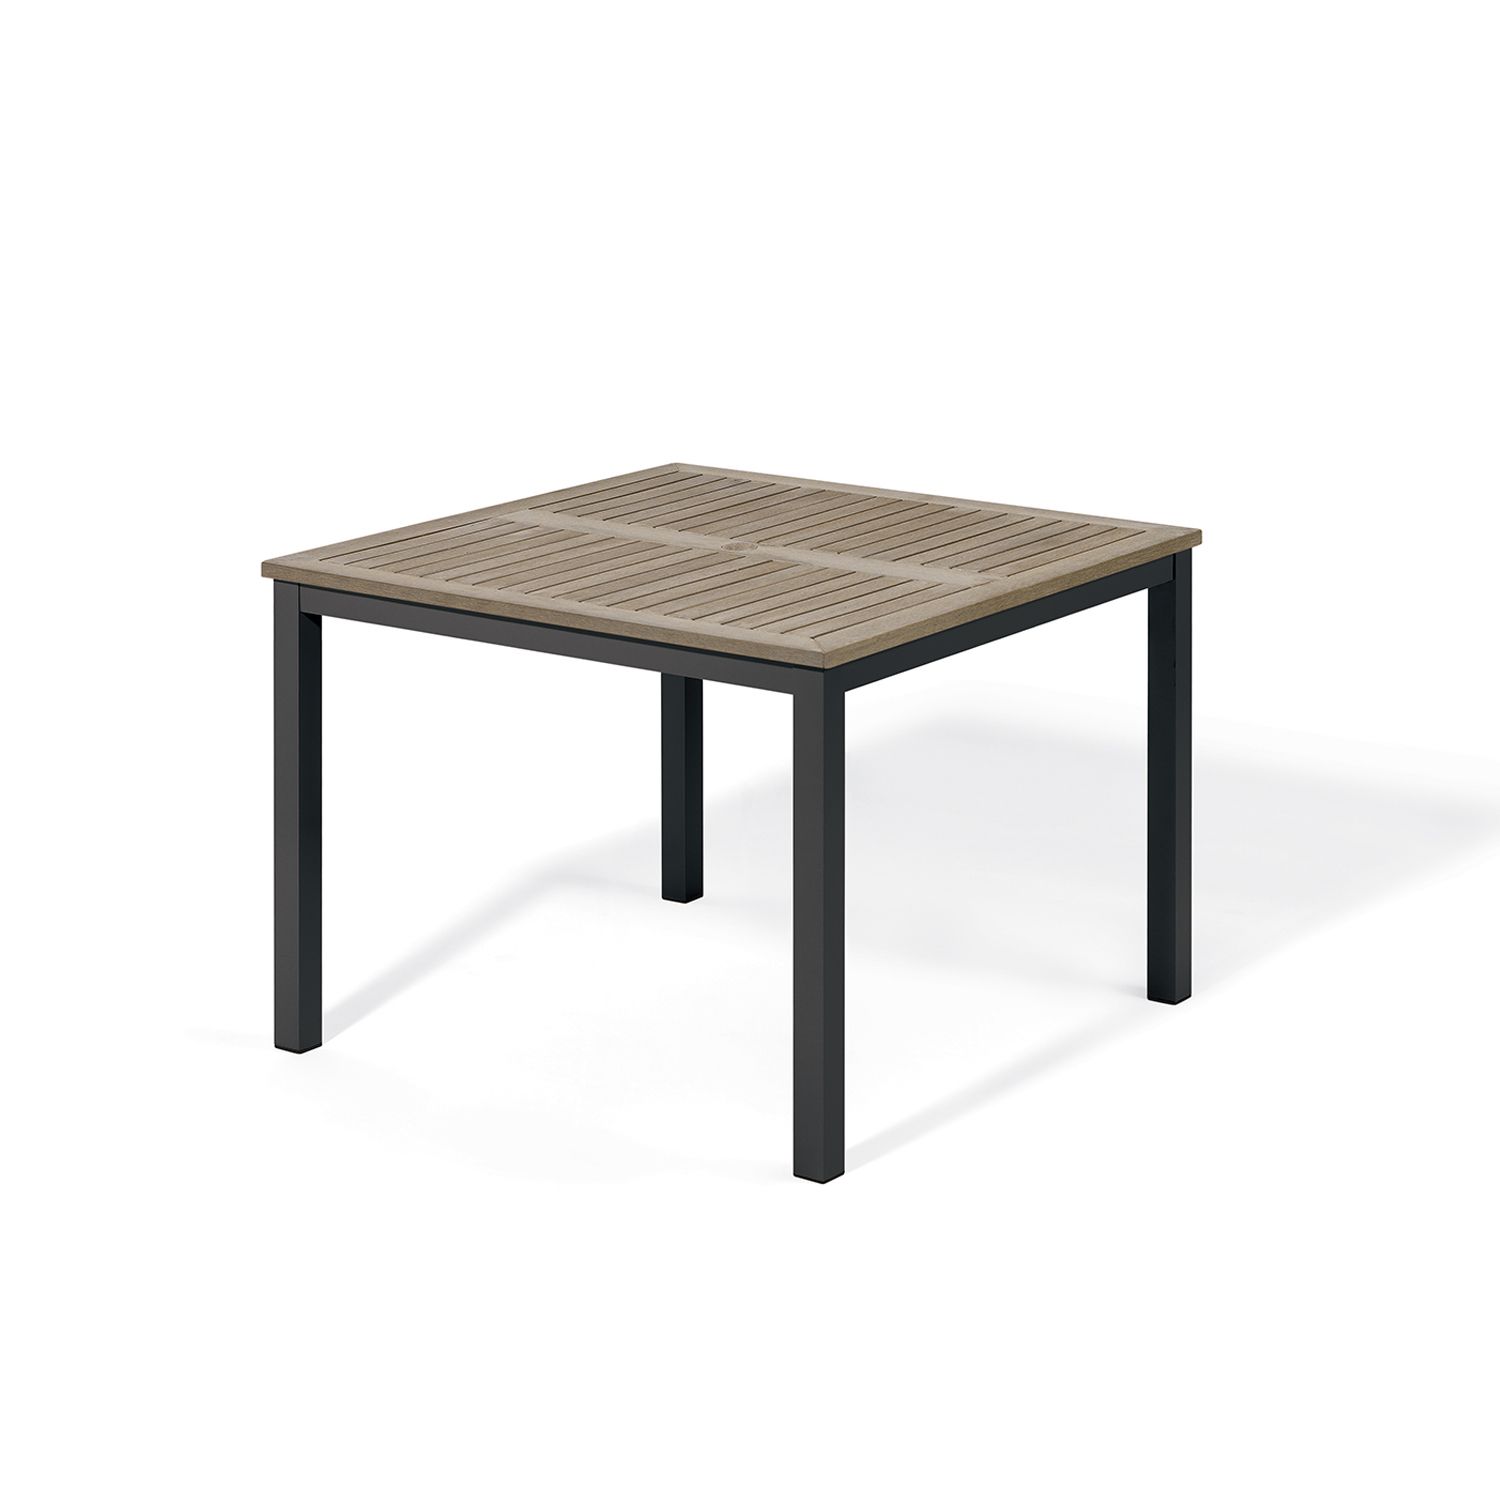 Steven 39'' Dining Tables Within Best And Newest Travira 39" Square Dining Table – Oxford Garden (View 8 of 20)